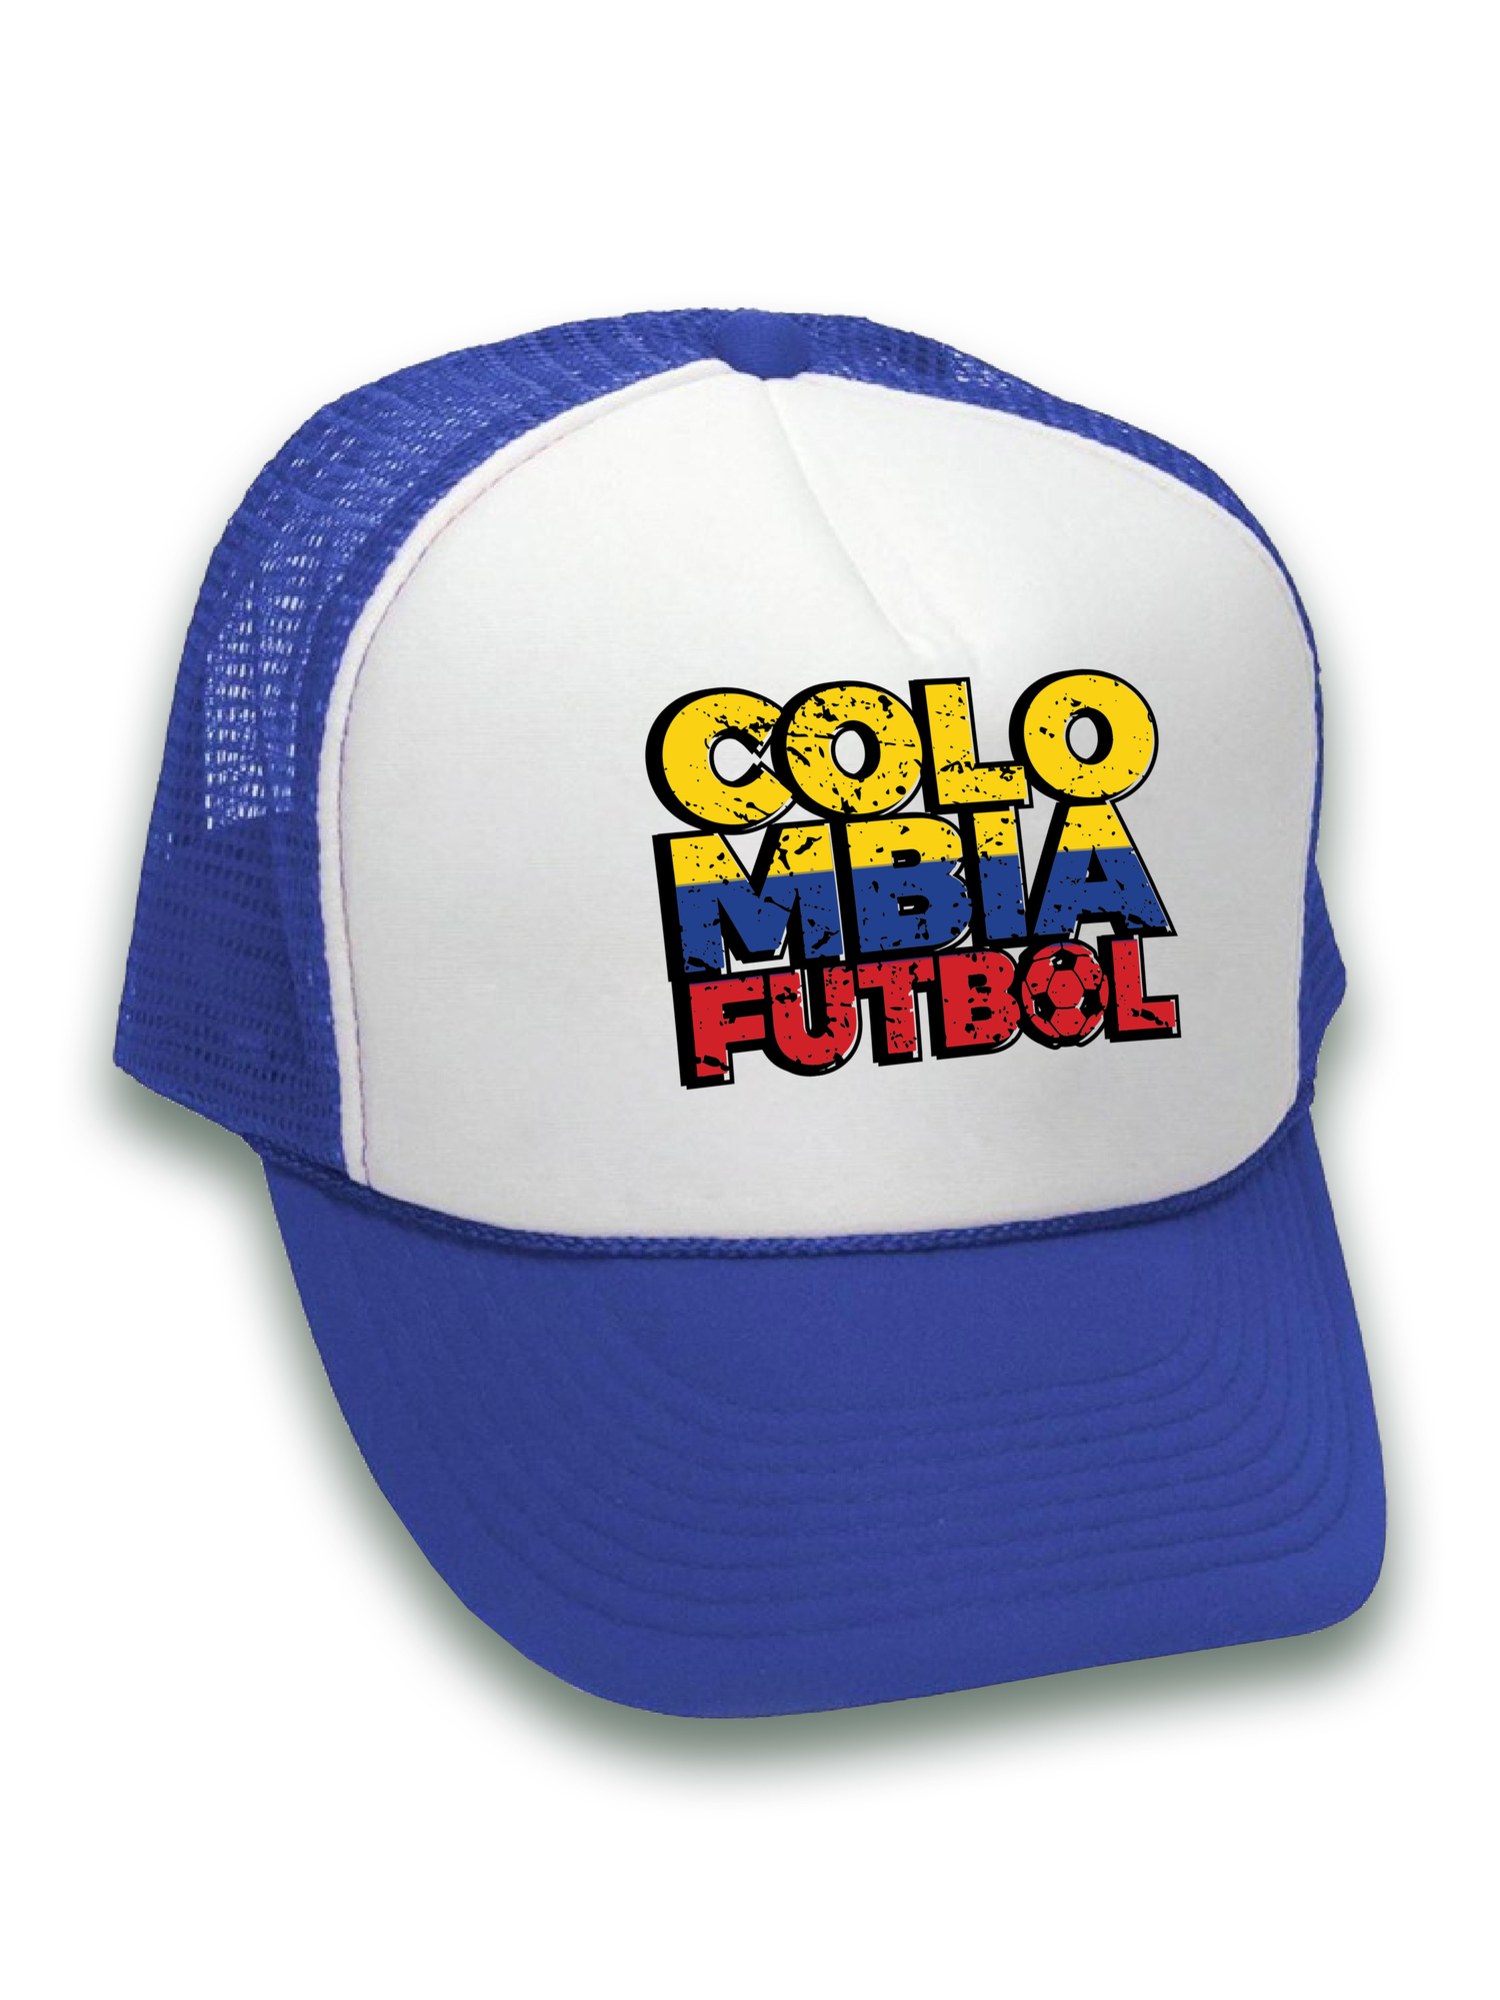 Awkward Styles Colombia Futbol Hat Colombia Trucker Hats for Men and Women Hat Gifts from Colombia Colombian Soccer Cap Colombian Hats Unisex Colombia Snapback Hat Colombia 2018 Trucker Hats - image 2 of 6